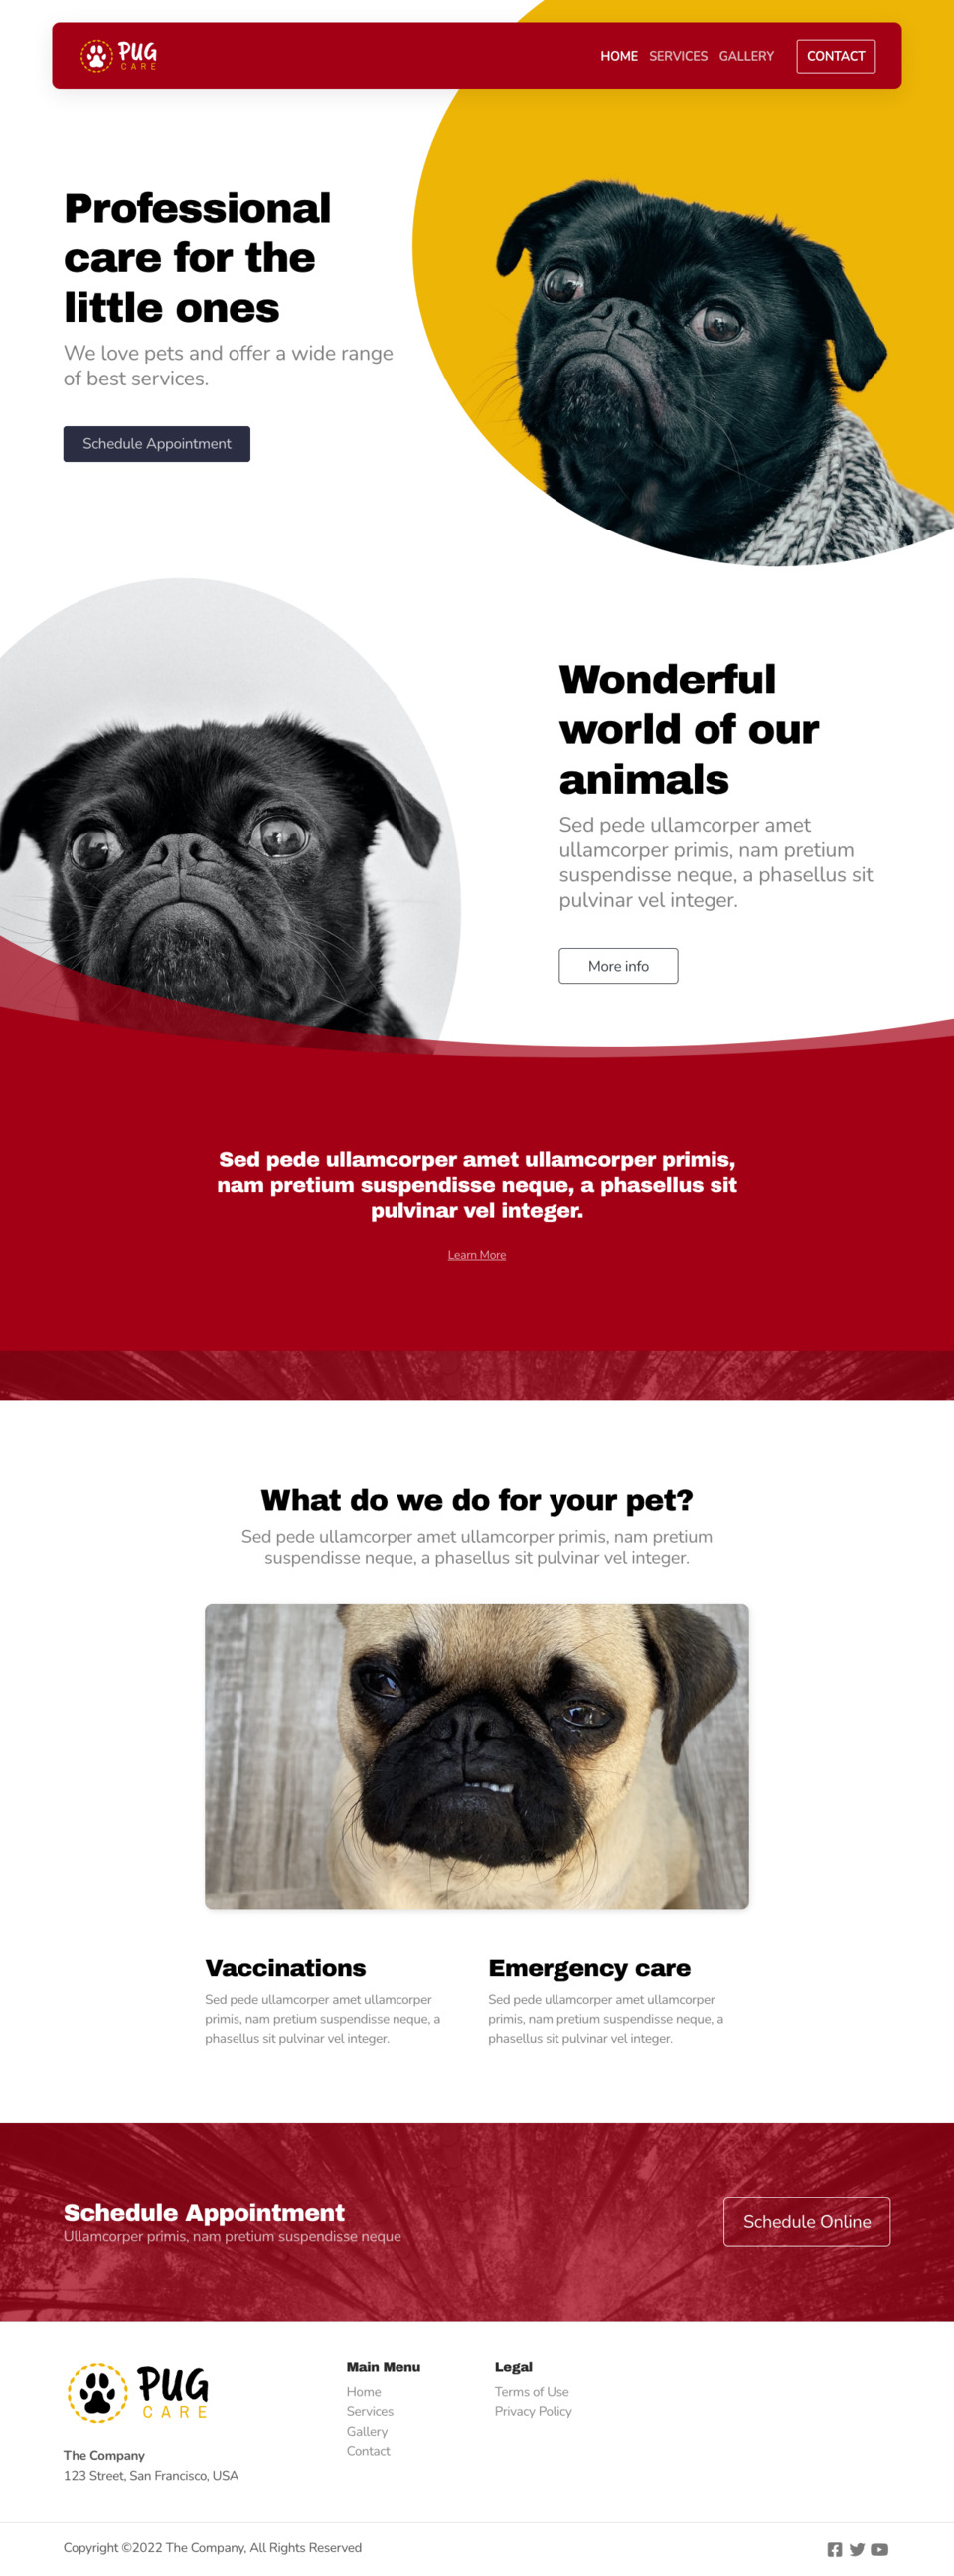 Pug Website Template - Perfect for businesses, bloggers, creatives, and anyone looking for a hassle-free website building experience.